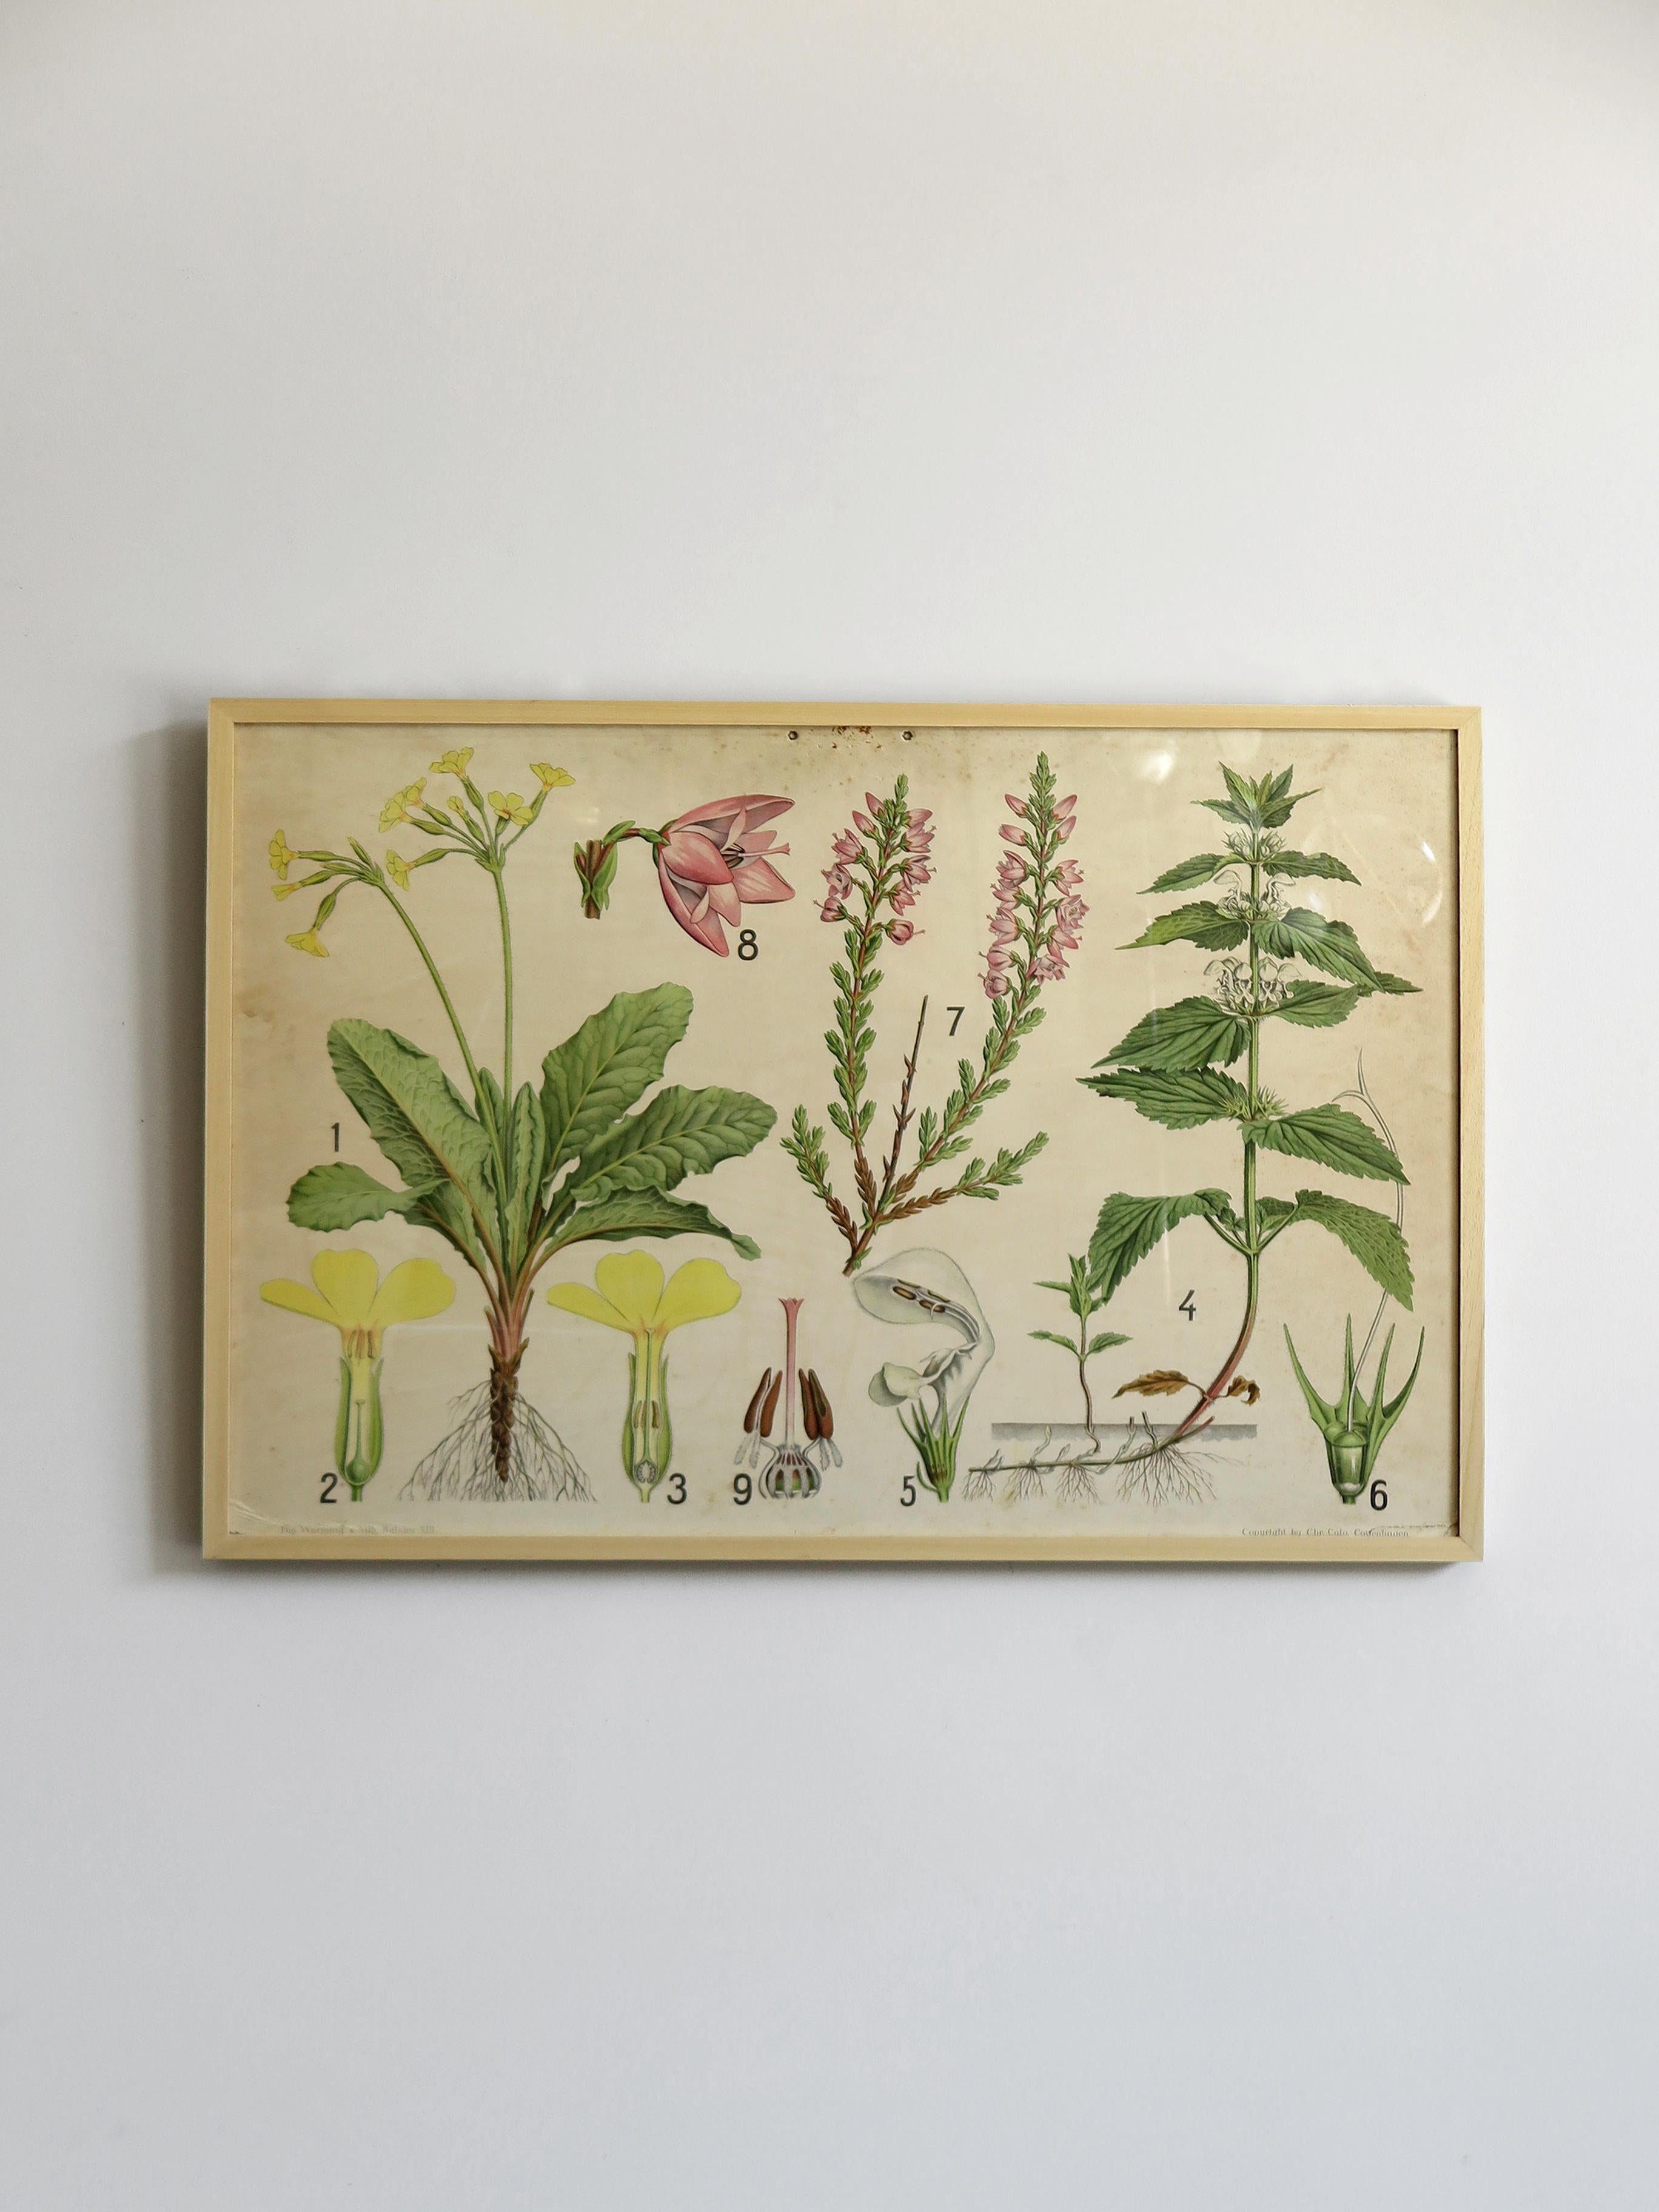 Scandinavian Mid-Century Modern design floral botanical illustrations picture on paper, from Denmark, 1950s
New wood and glass frame.